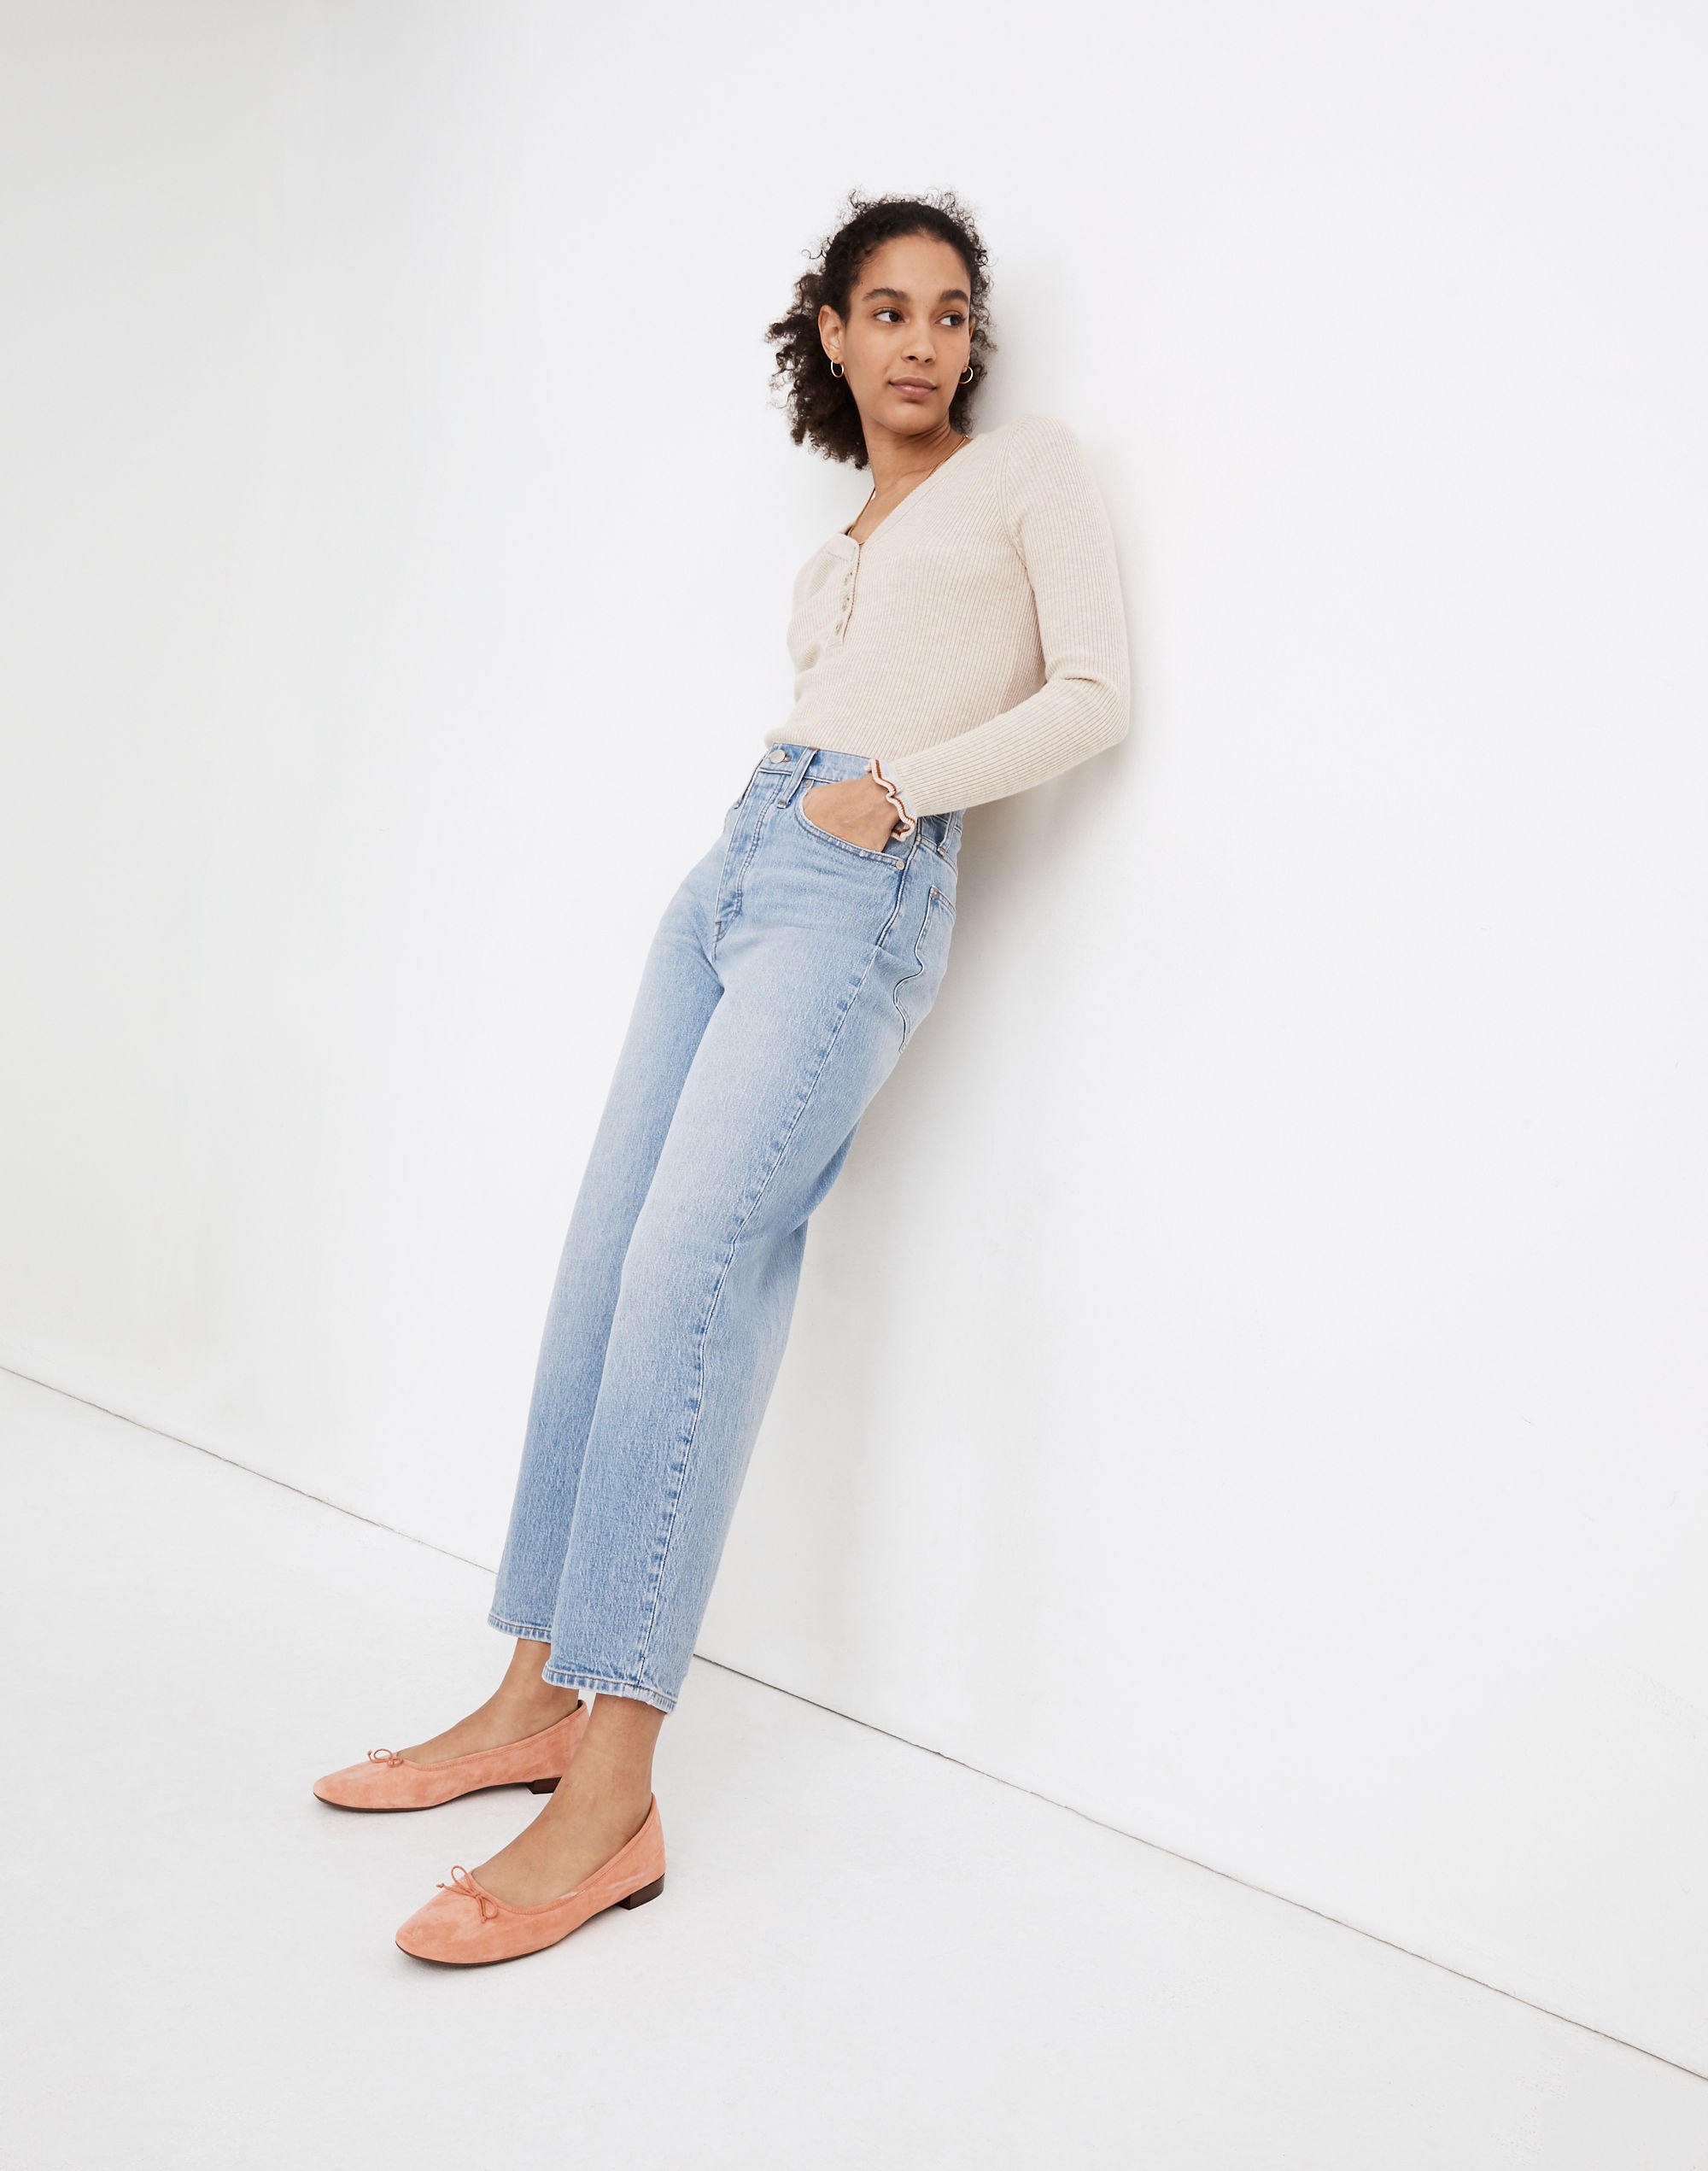 Women's Balloon Jeans in Hewes Wash | Madewell